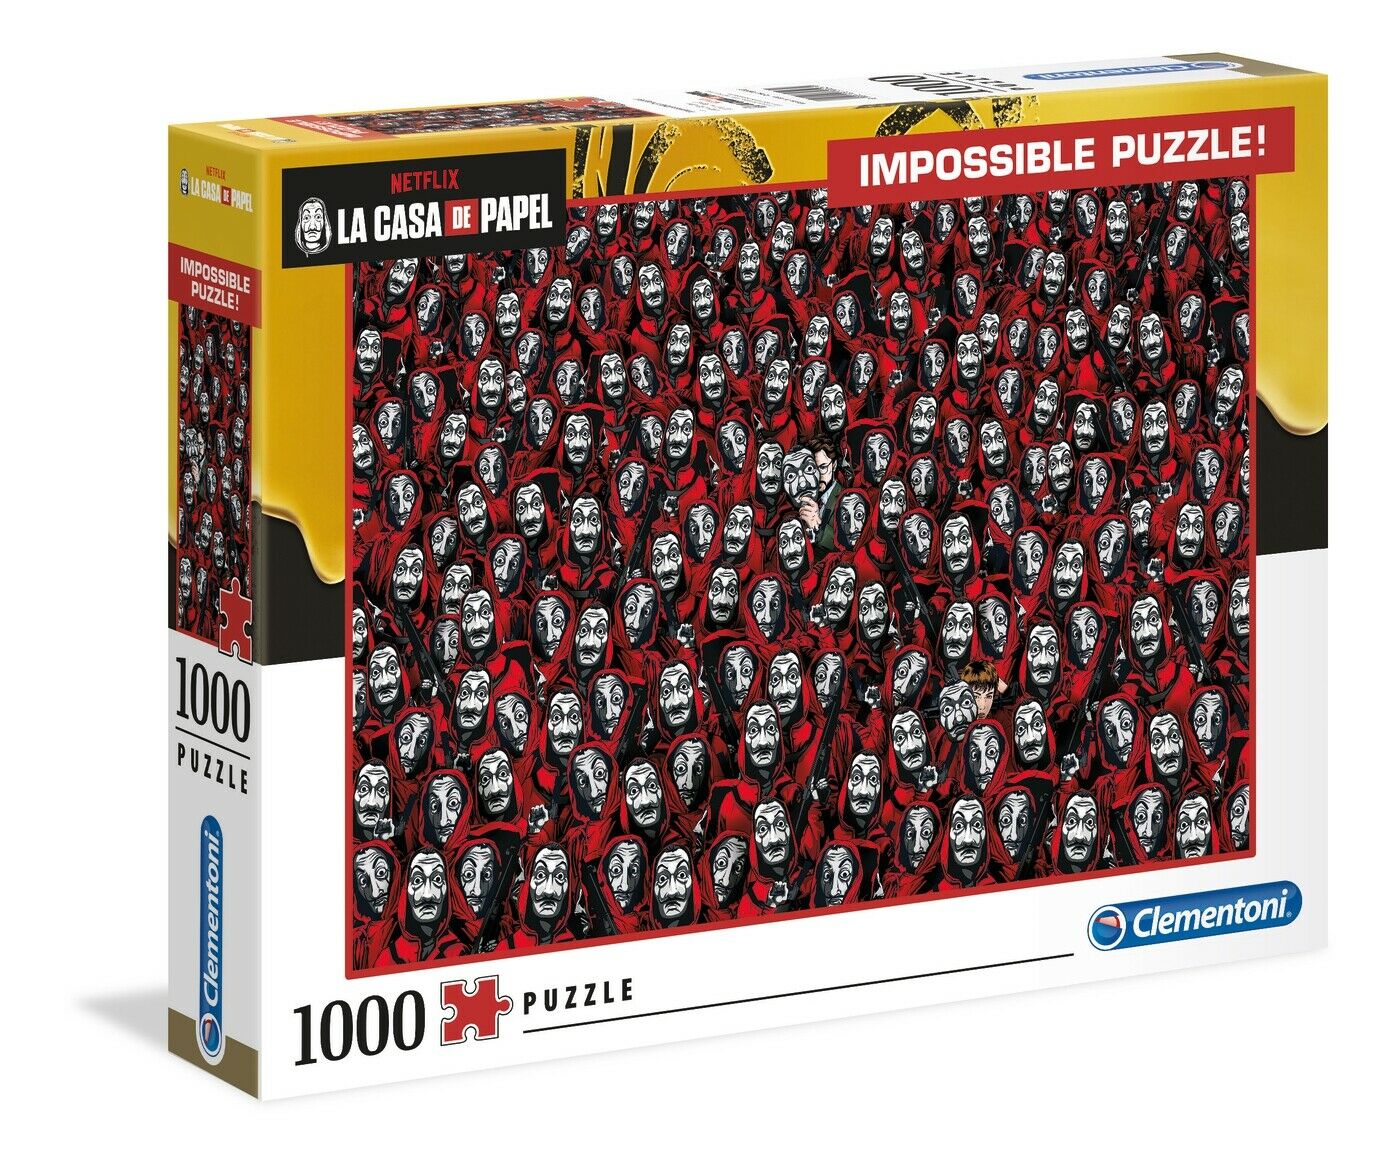 House of cards - 1000 Puzzleteile